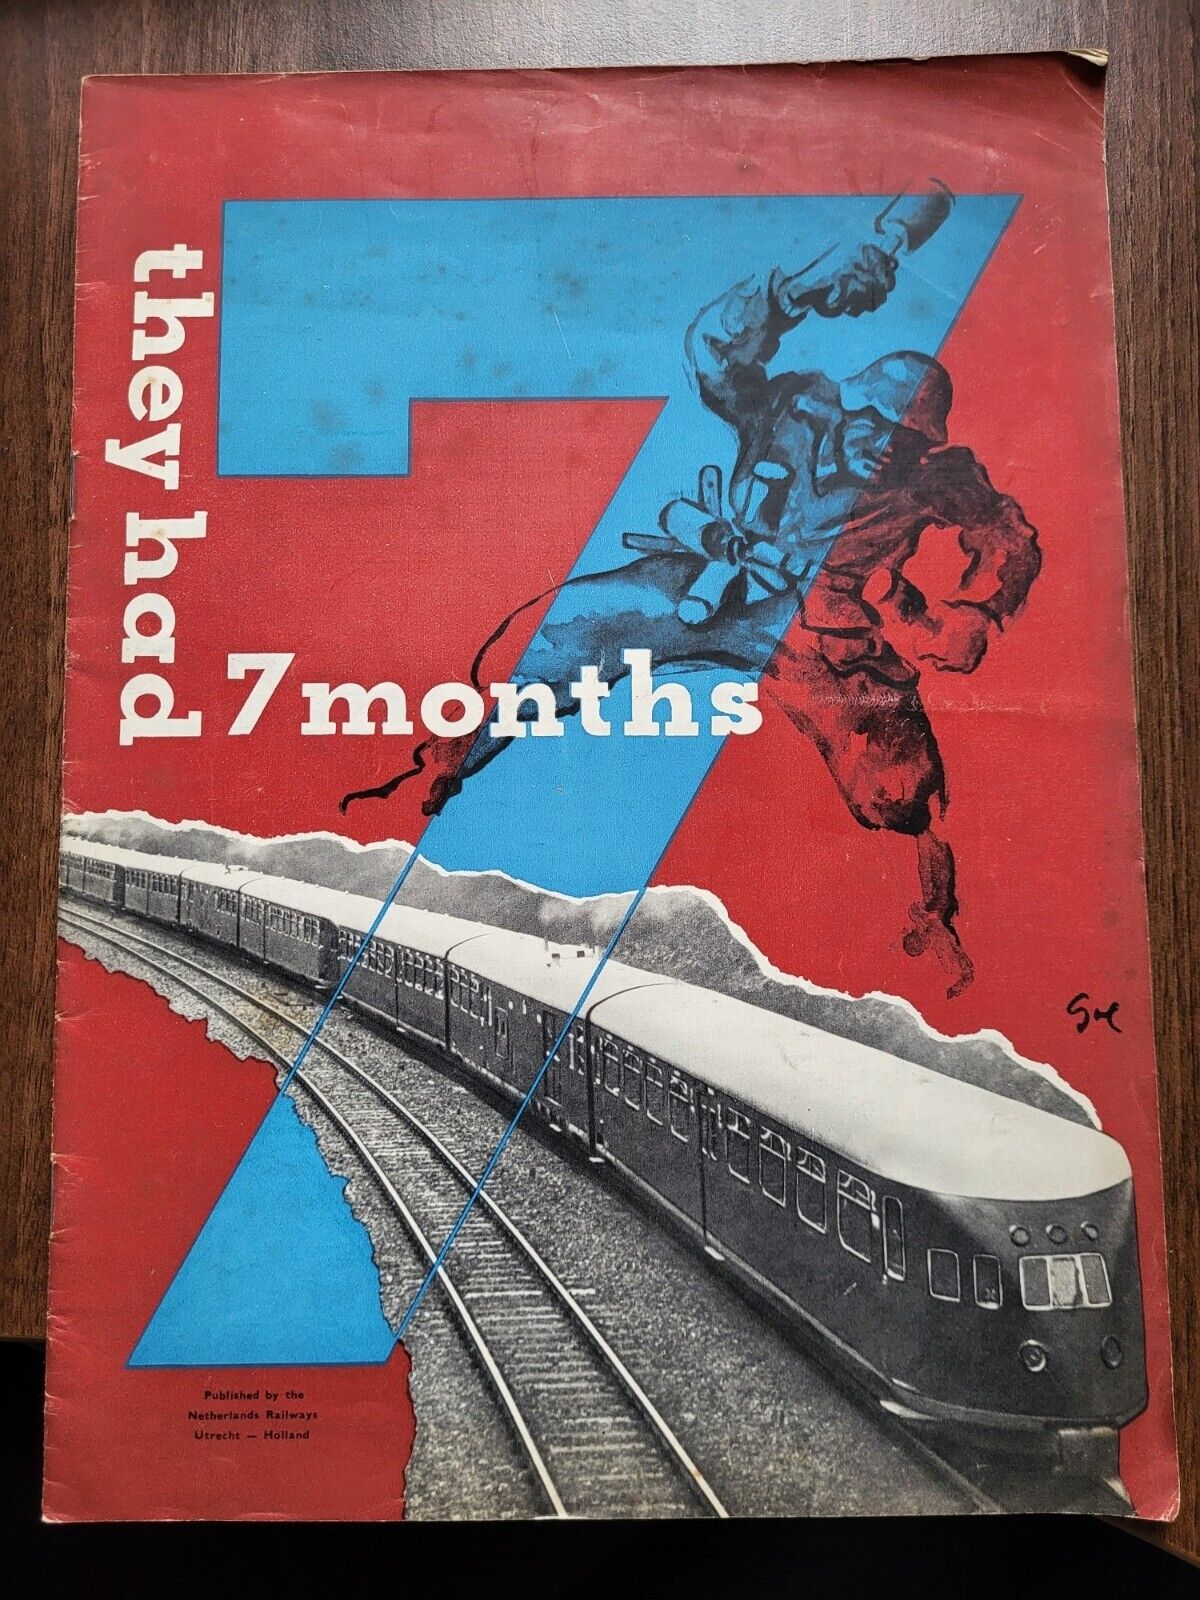 Netherlands Railways Brochure Dated 1946  They Had 7 Months